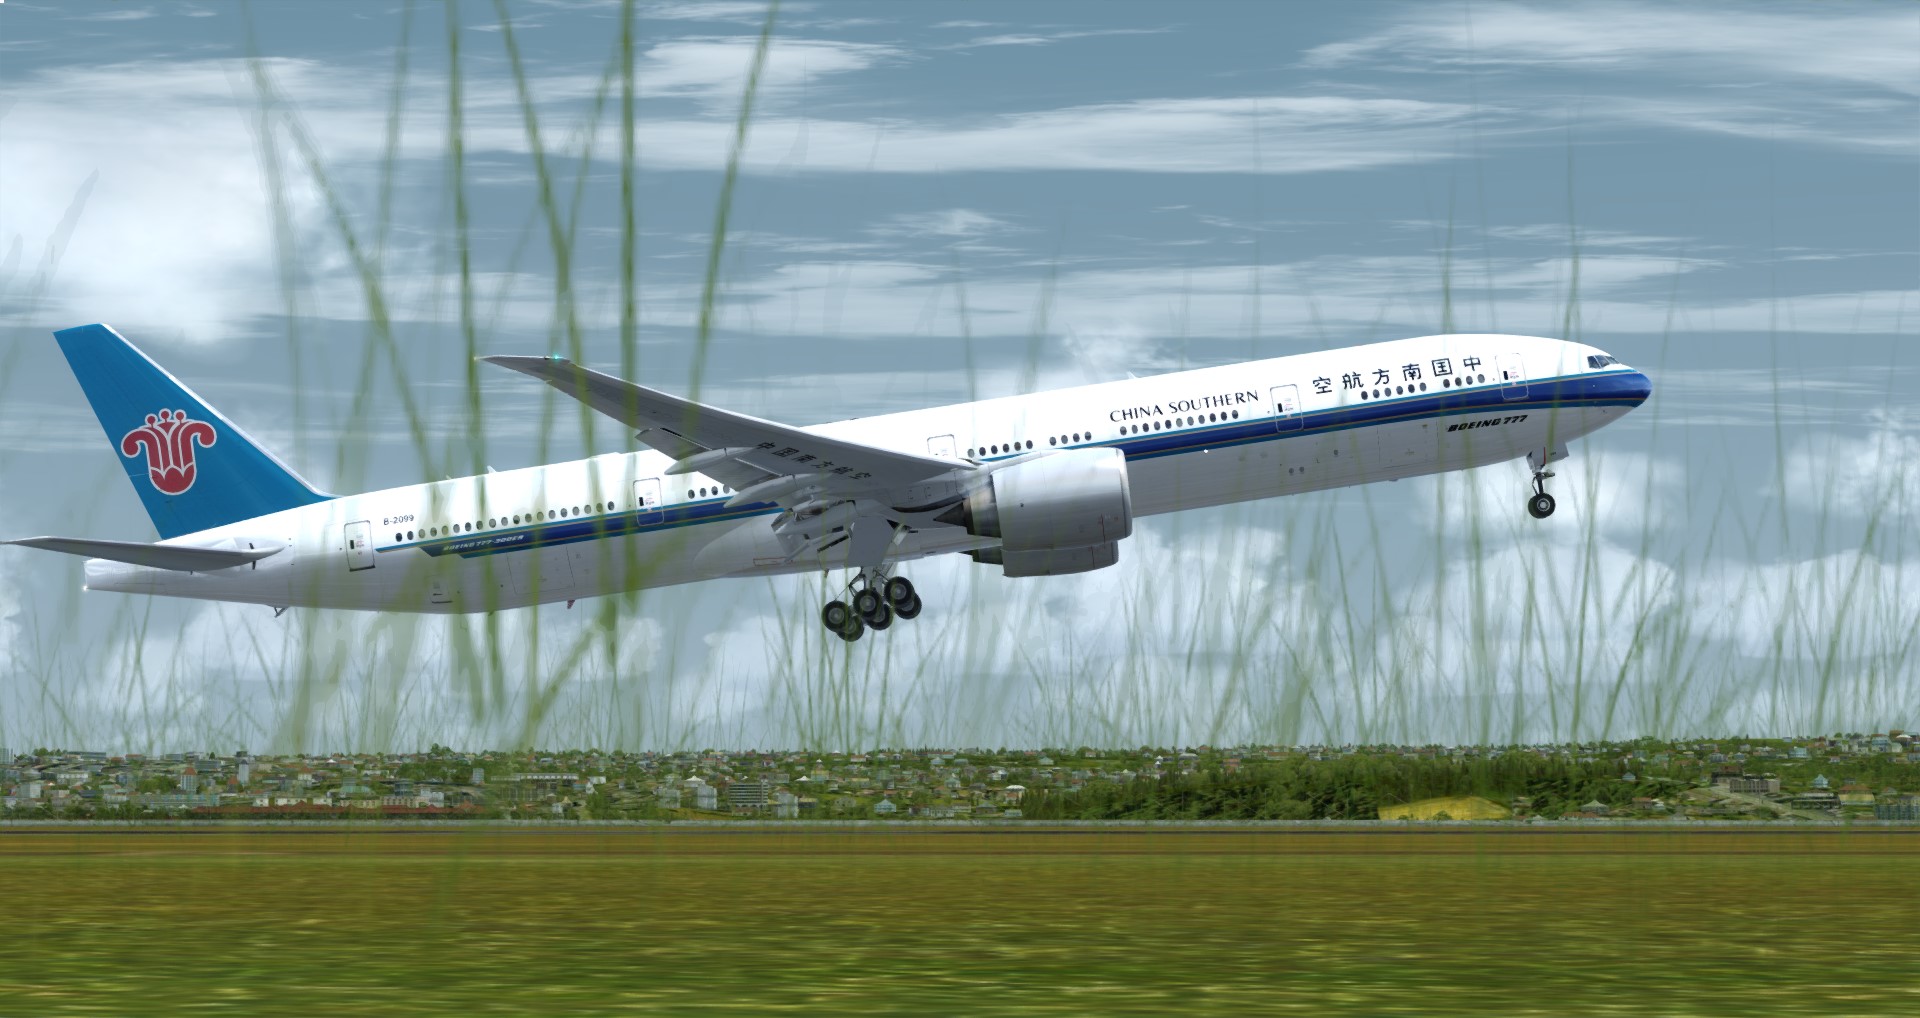 P3D V4 77W China Southern Airlines WADD-ZGGG 营救同胞-4856 